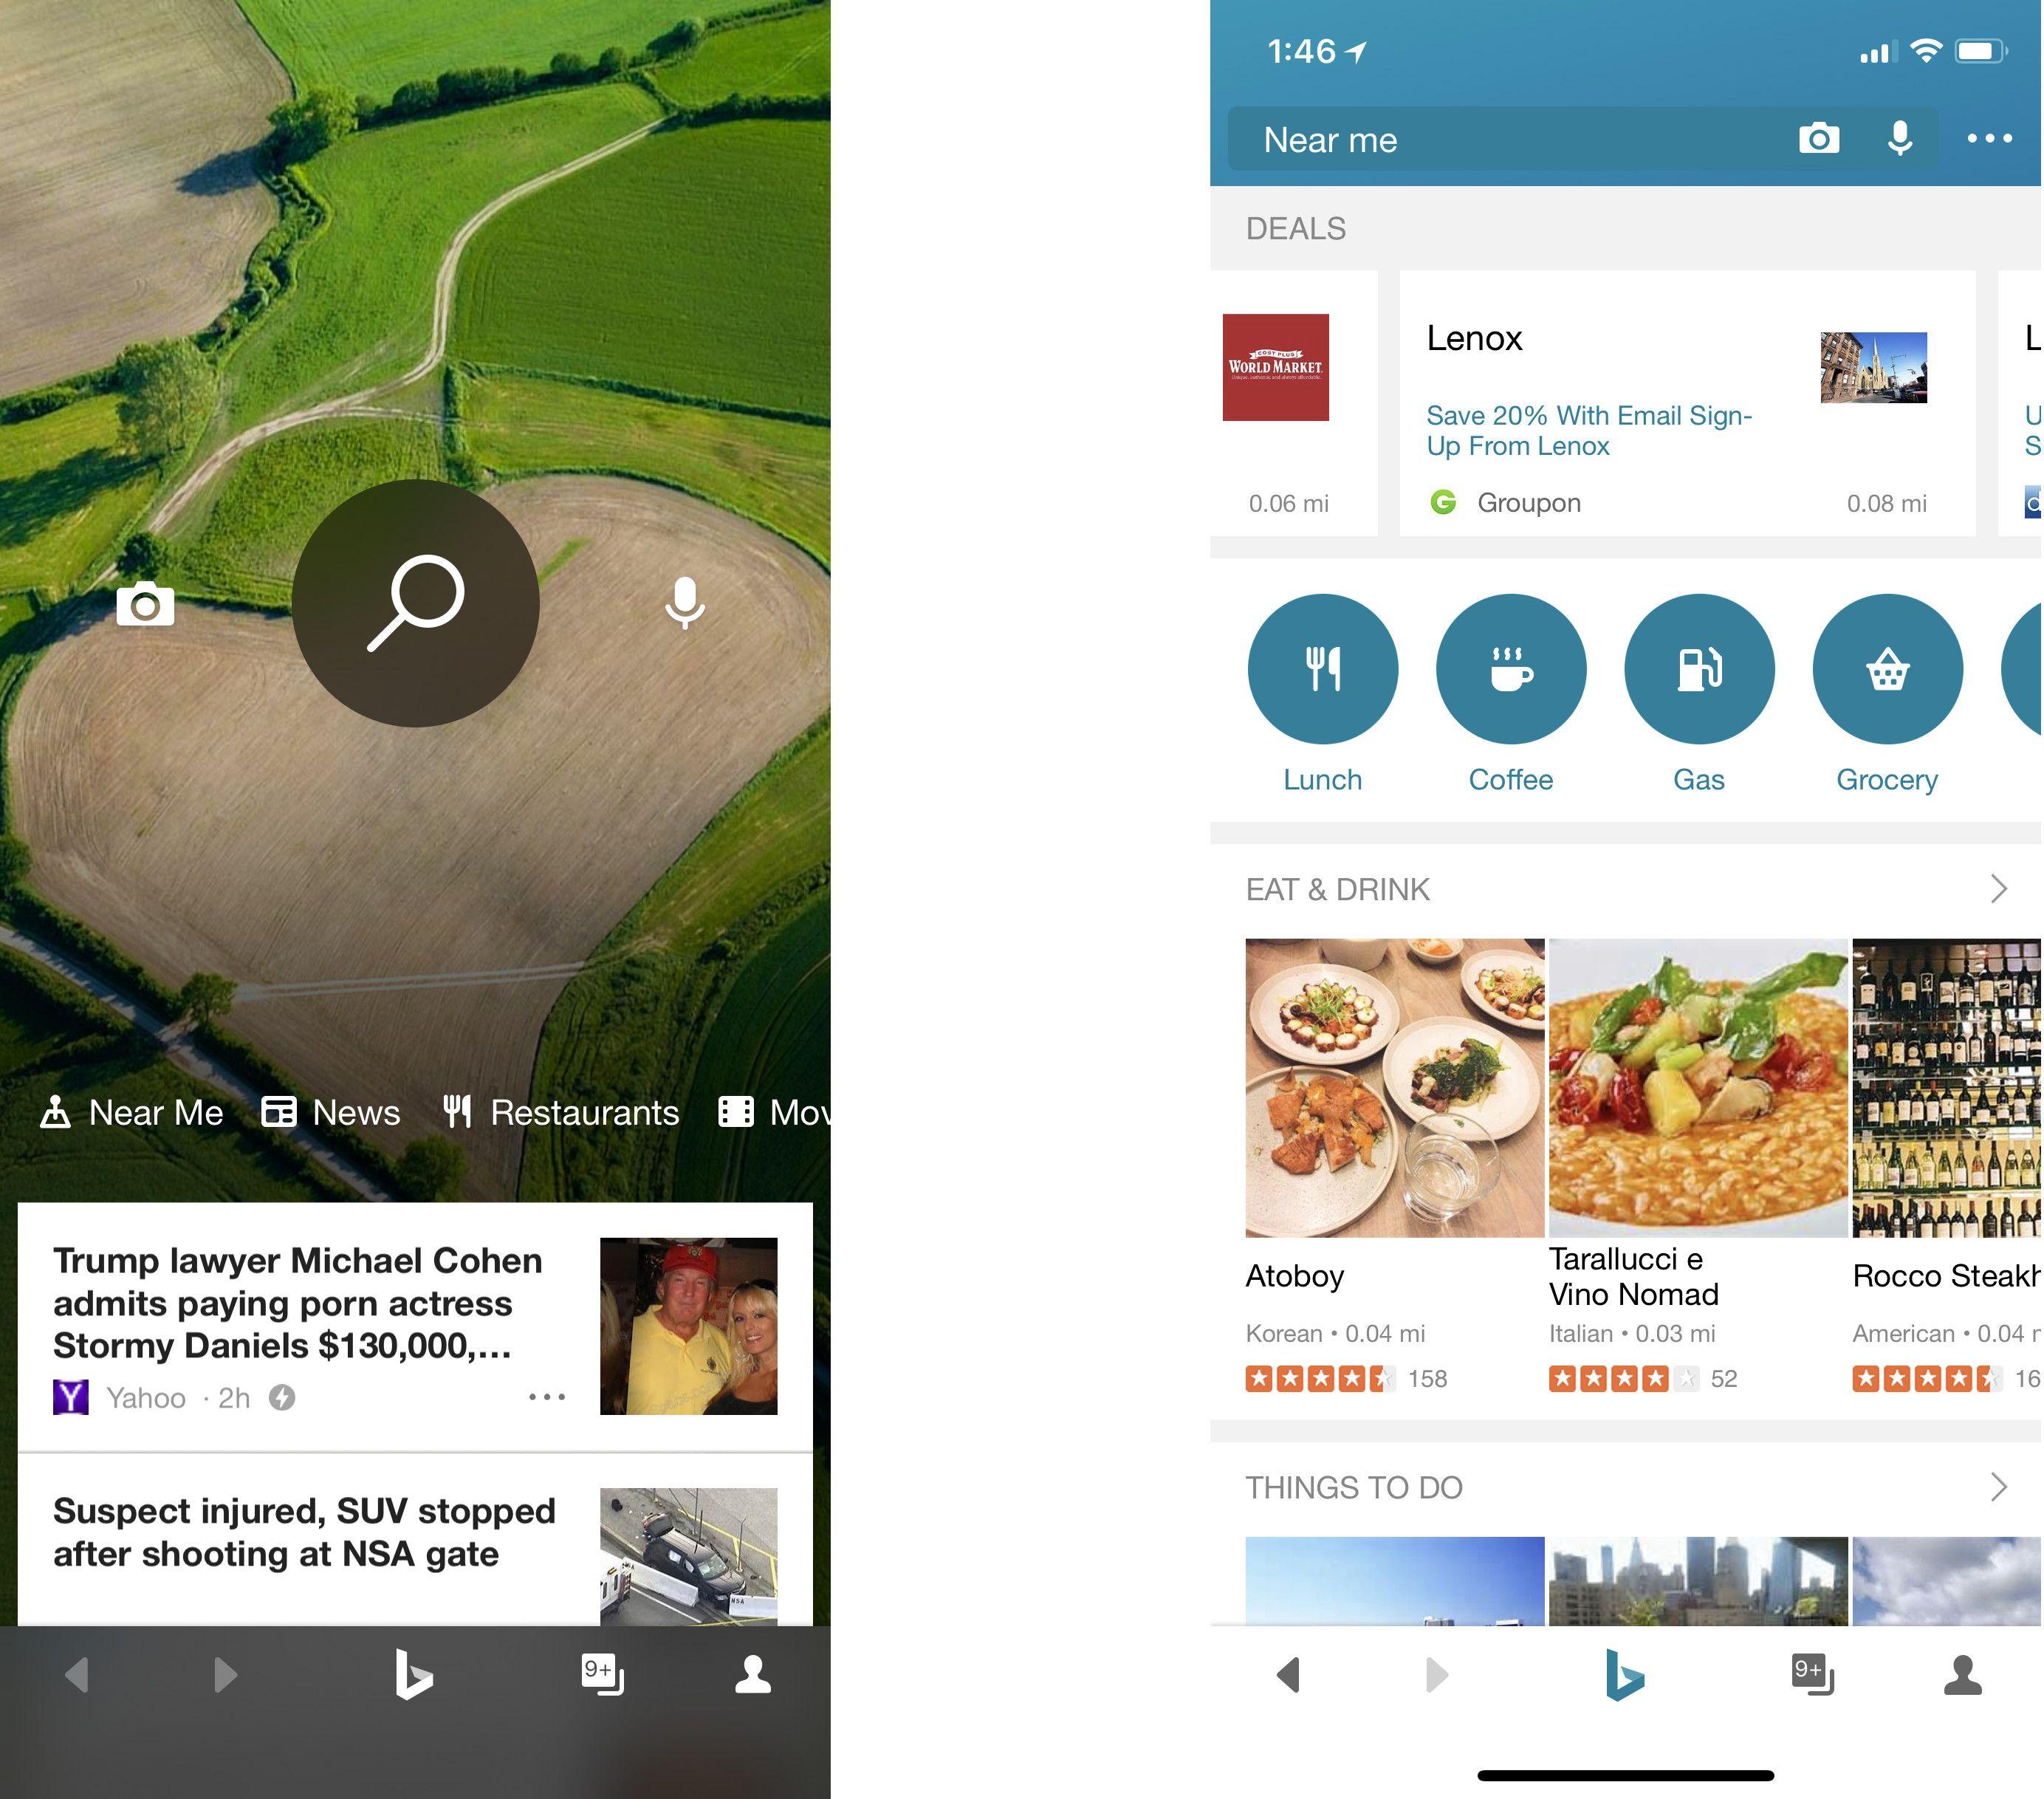 Bing App Logo - 20 Reasons to Search With Bing | PCMag.com